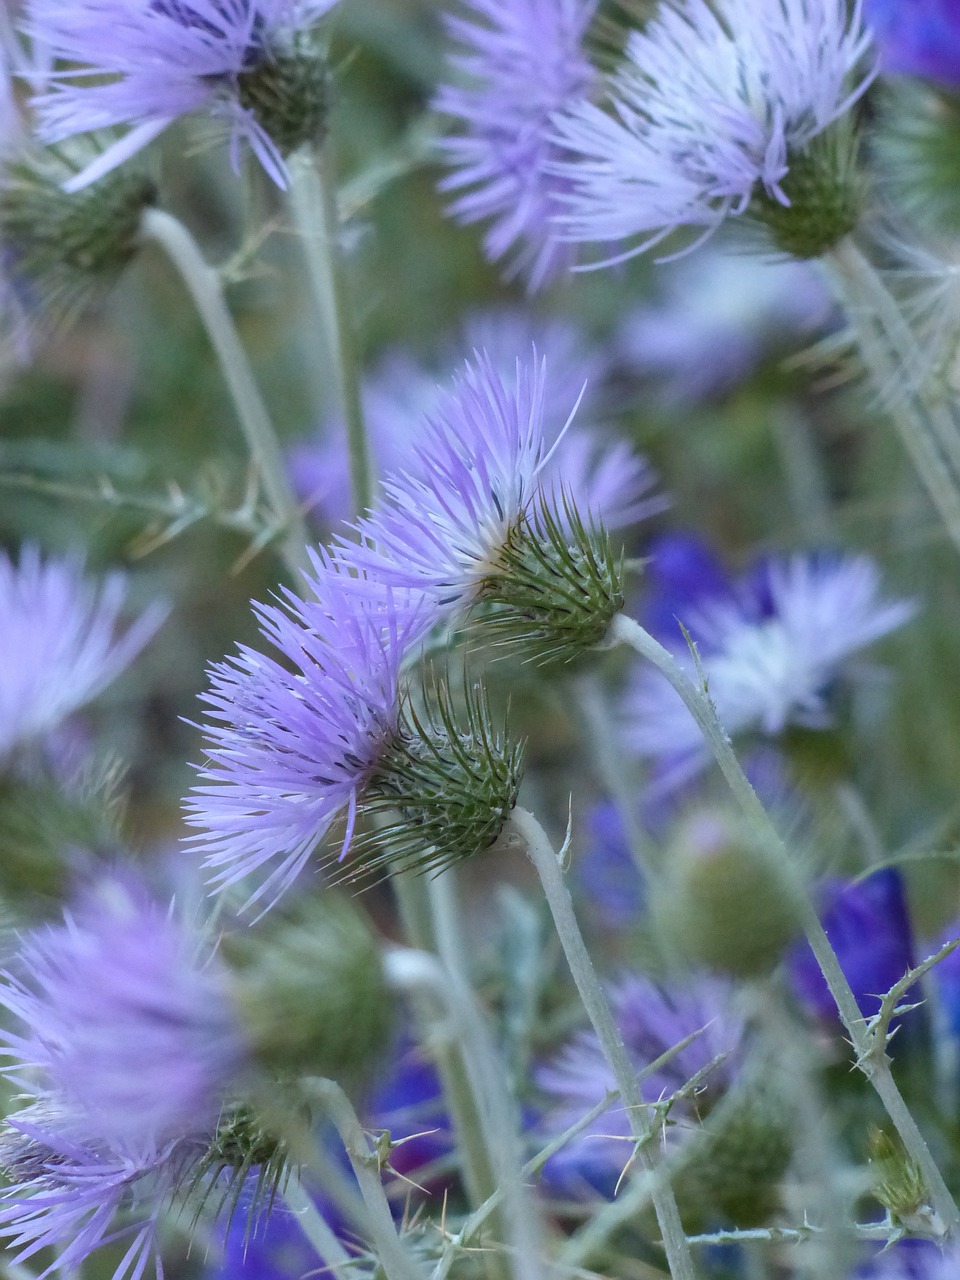 steal-thistle thistle blossom free photo